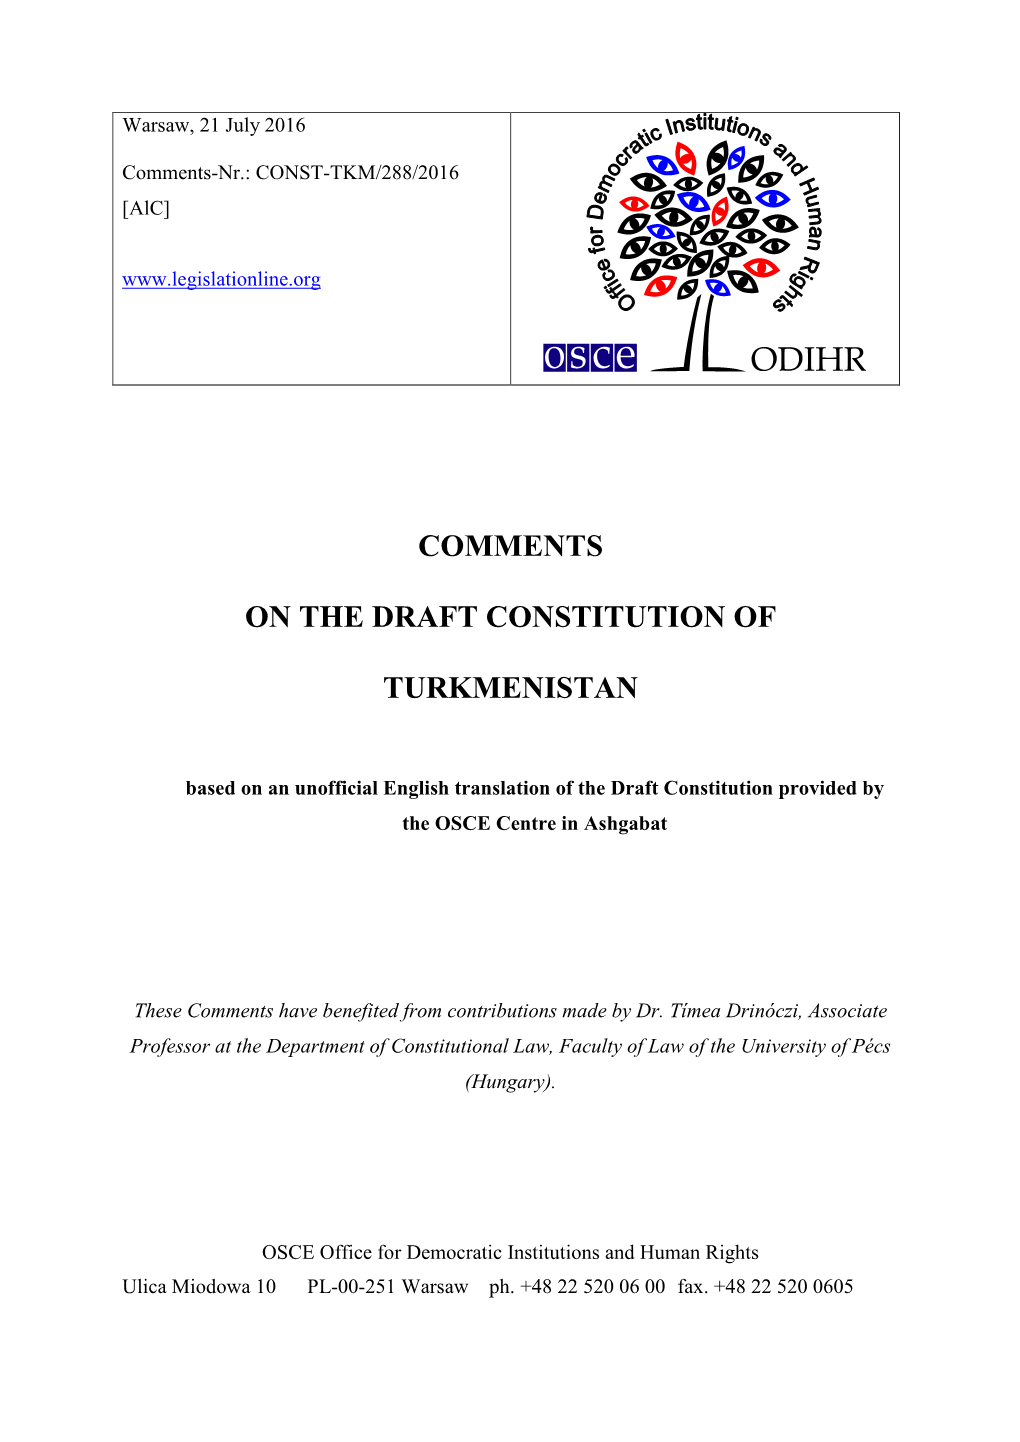 Comments on the Draft Constitution of Turkmenistan